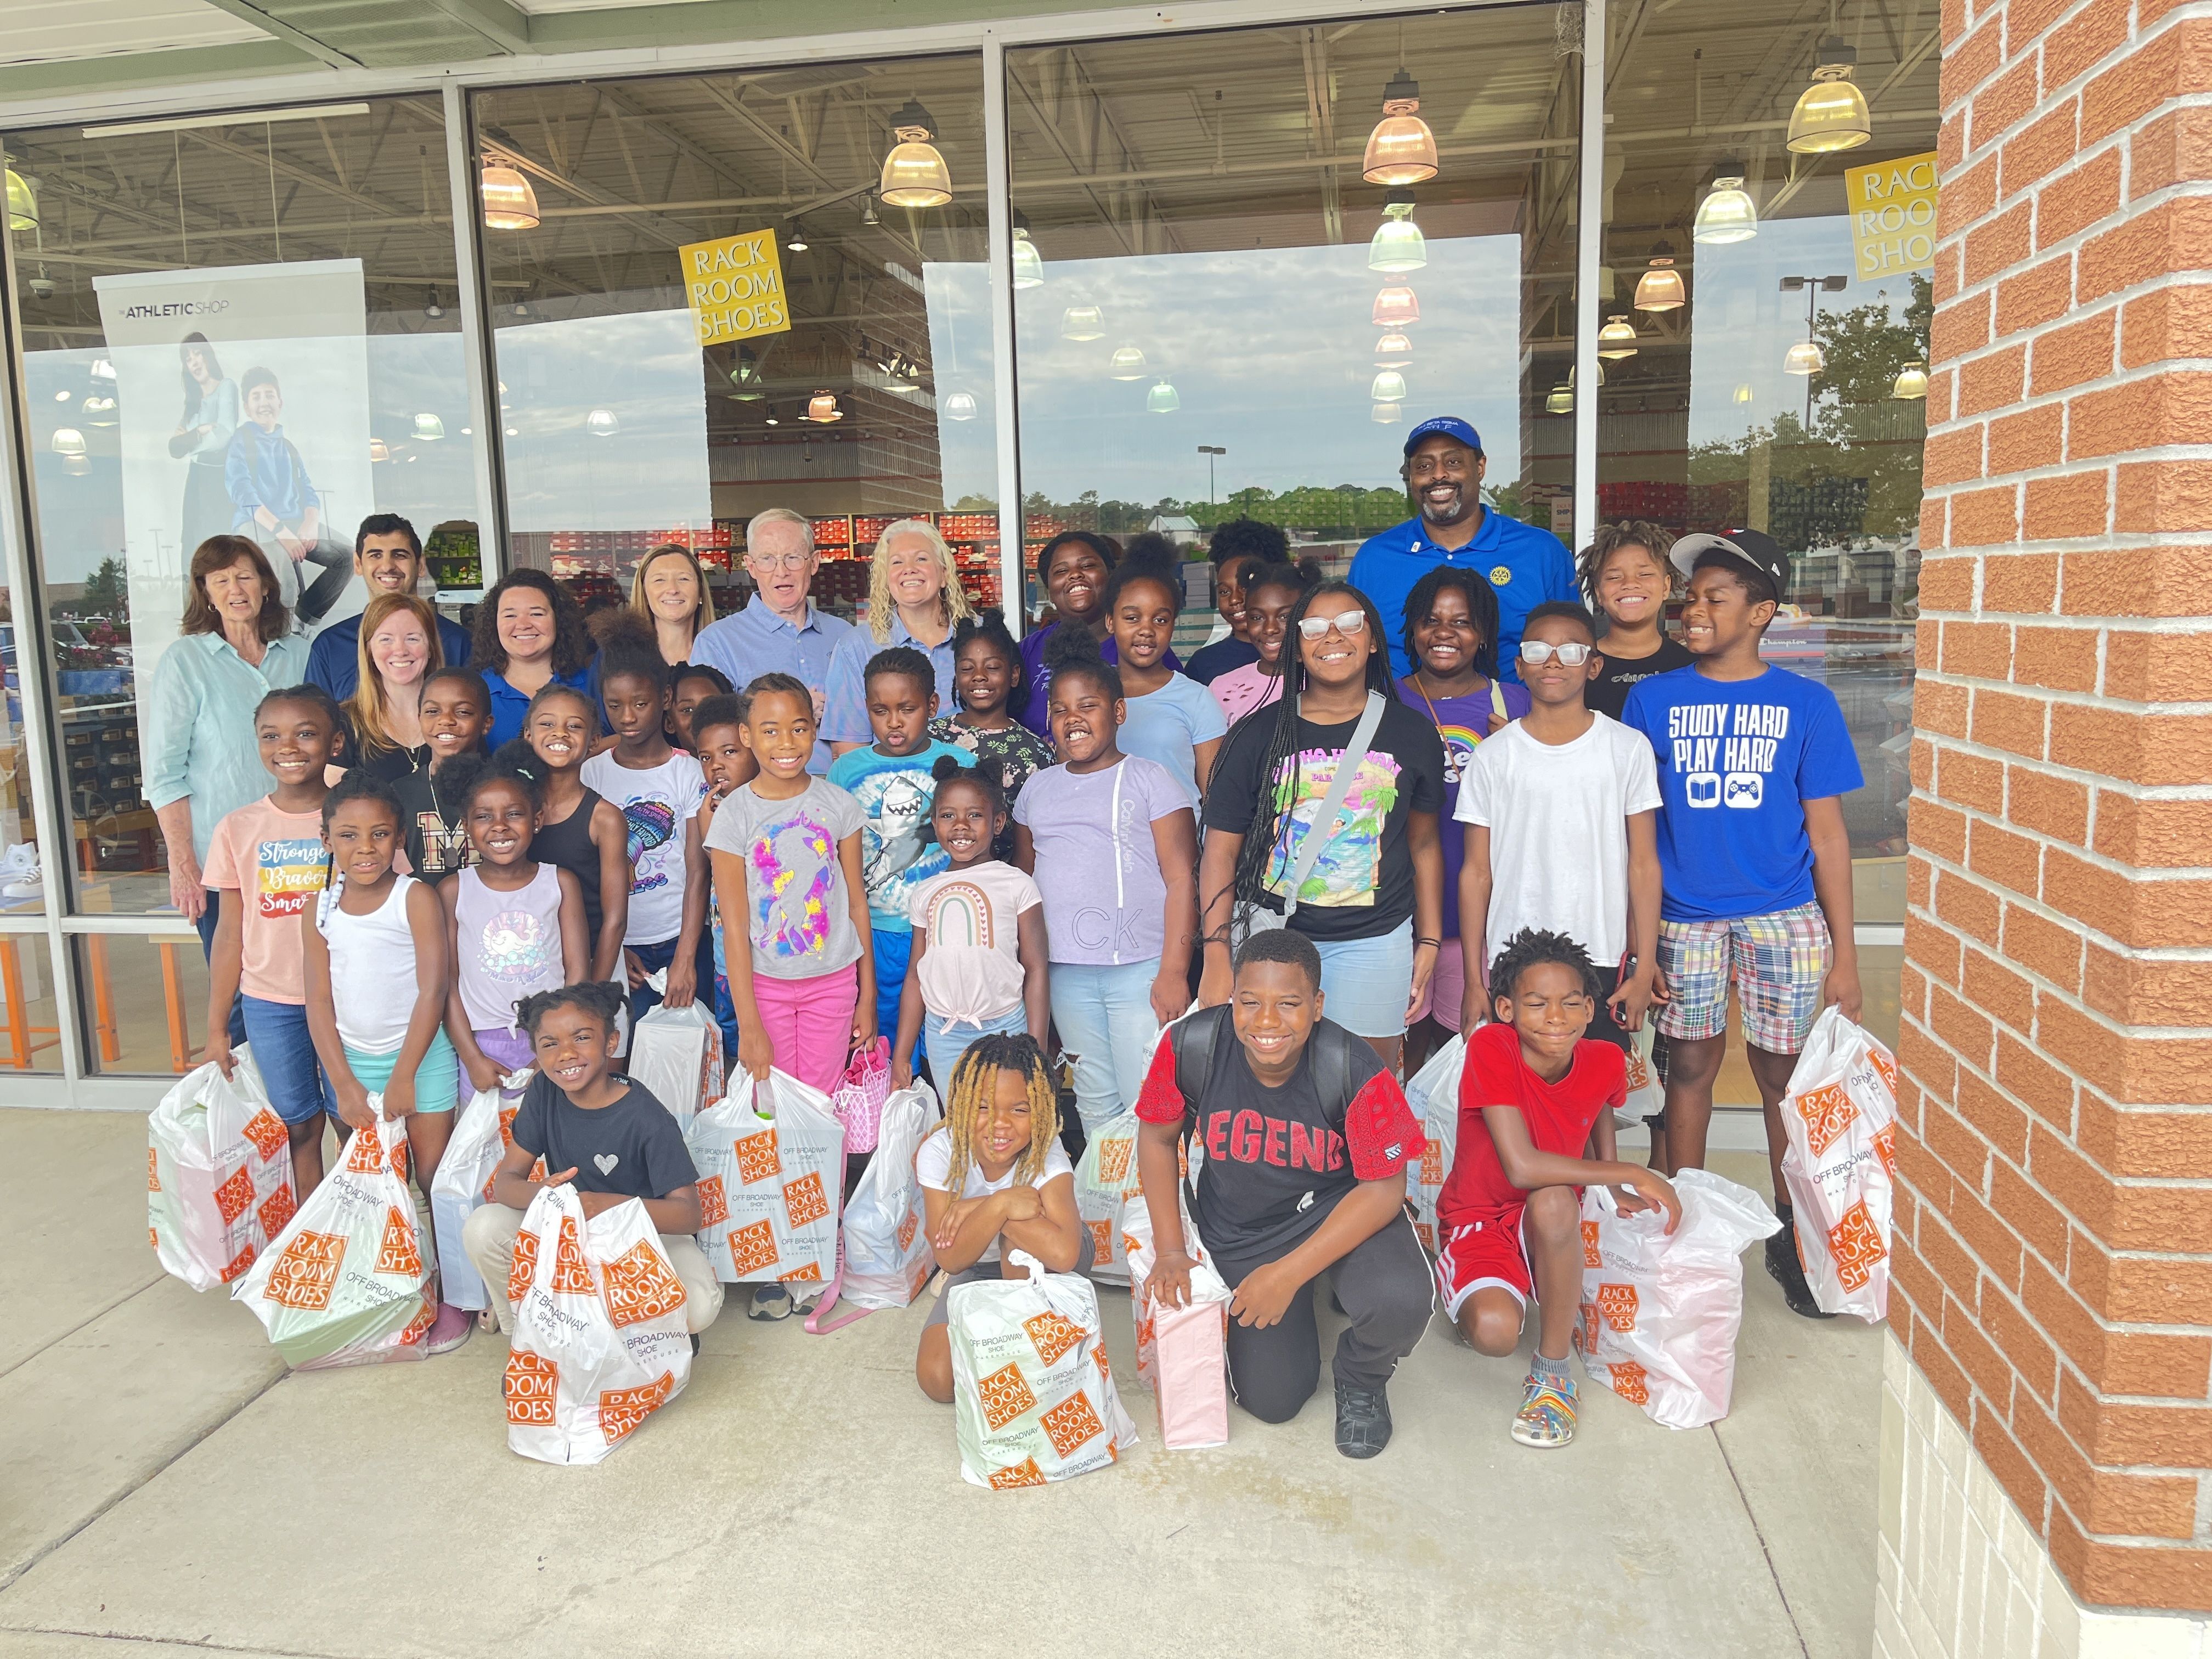 Florence Breakfast Rotary Club members bought new shoes for 100 Boys & Girls Club youth to start the school year off right.